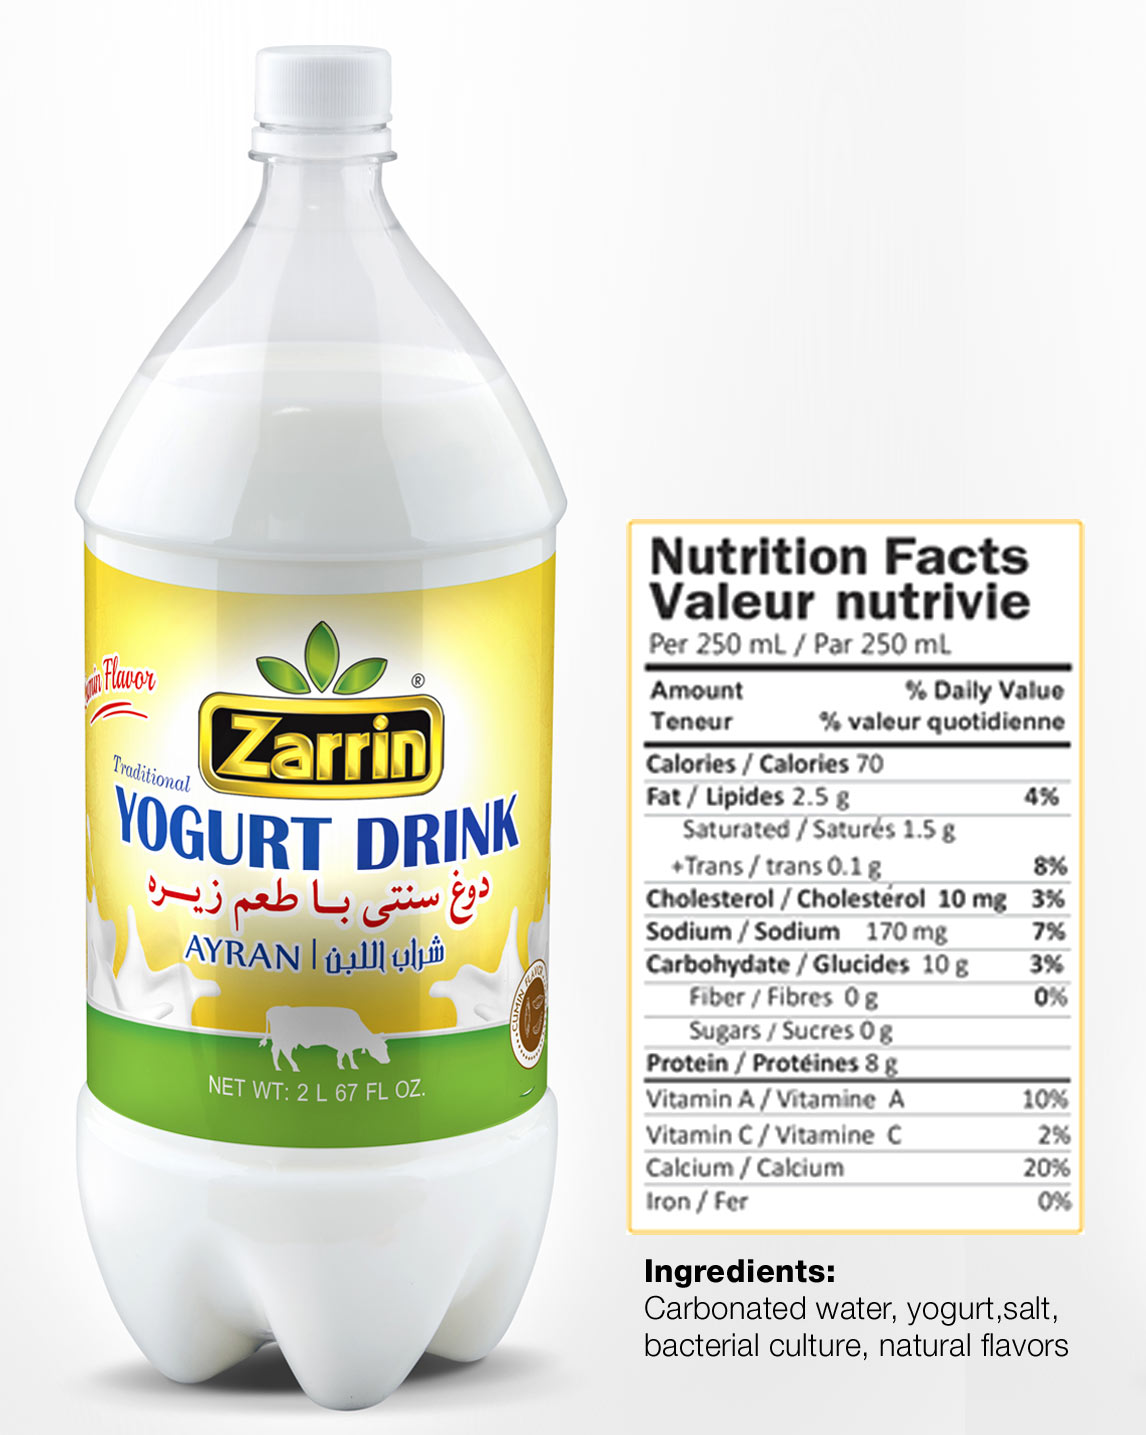 Yogurt drink with cumin flavor by Zarrin. It is also known as Doogh or Ayran.